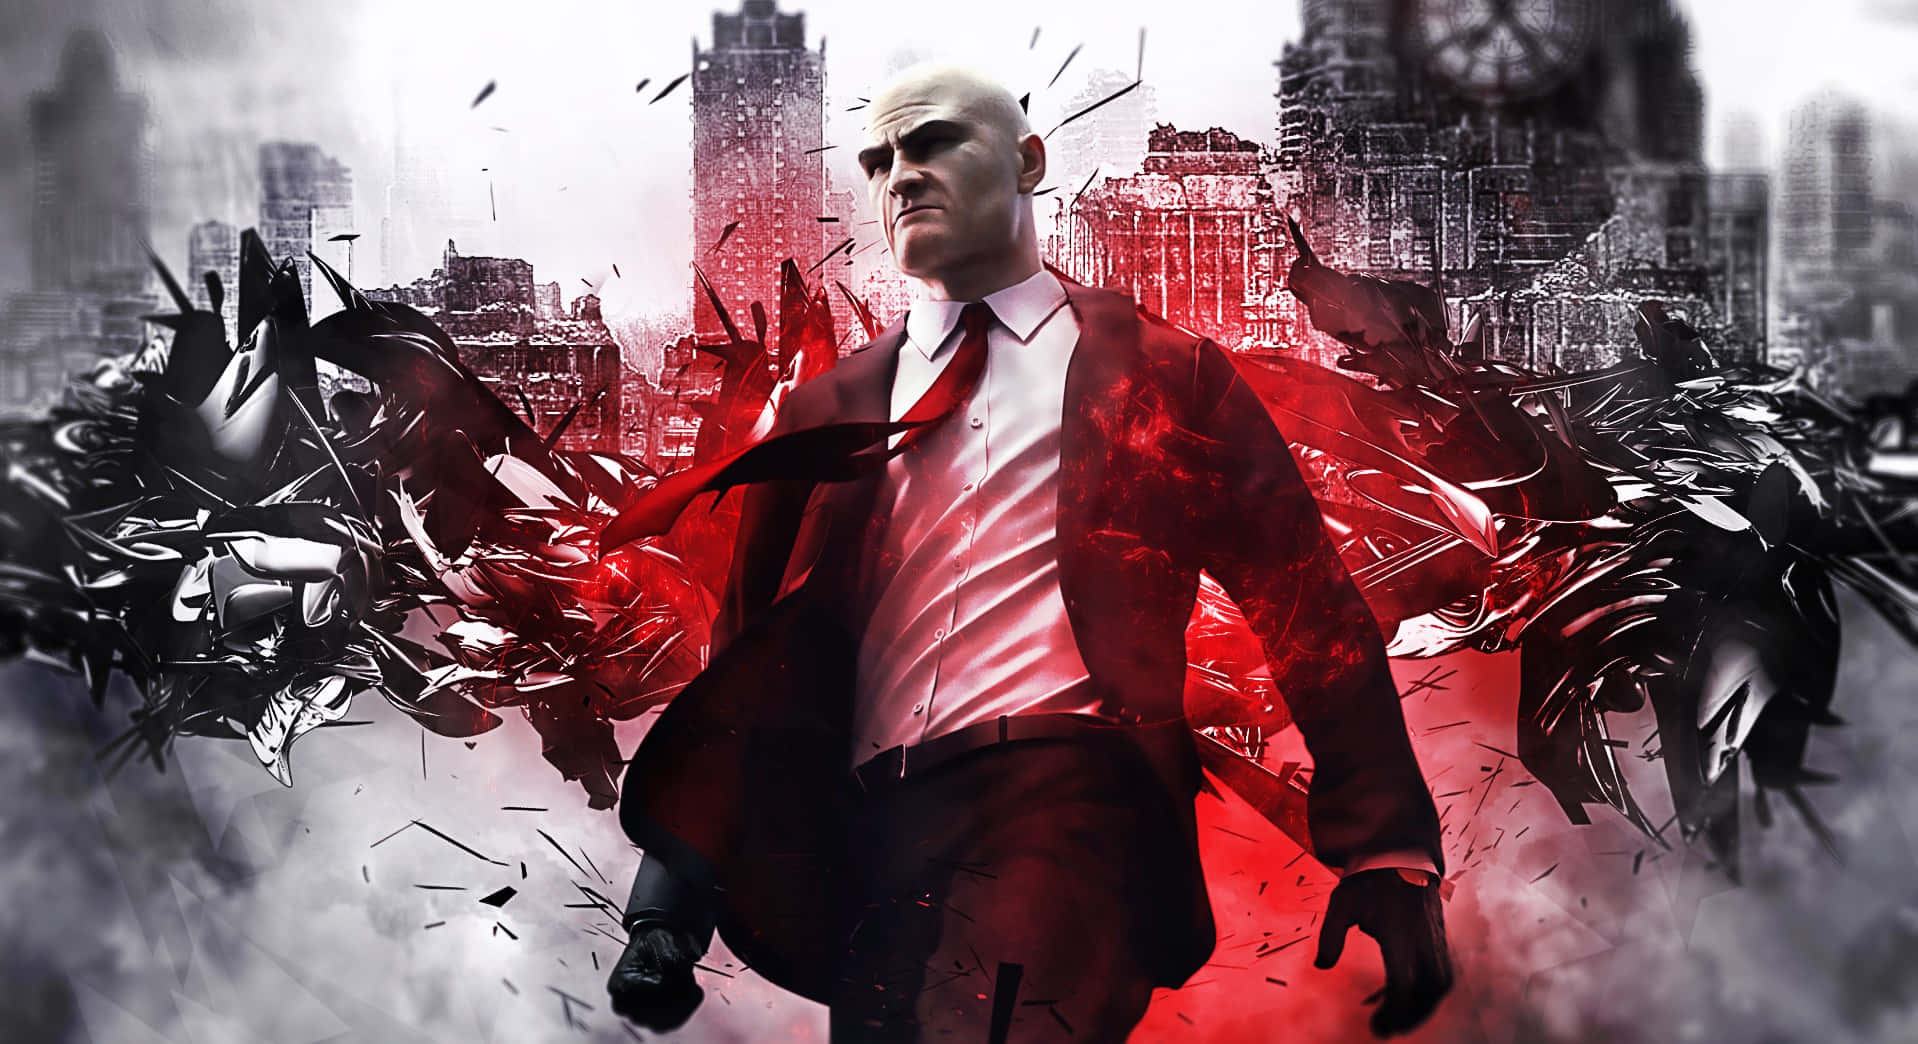 The high stakes world of Hitman: Absolution